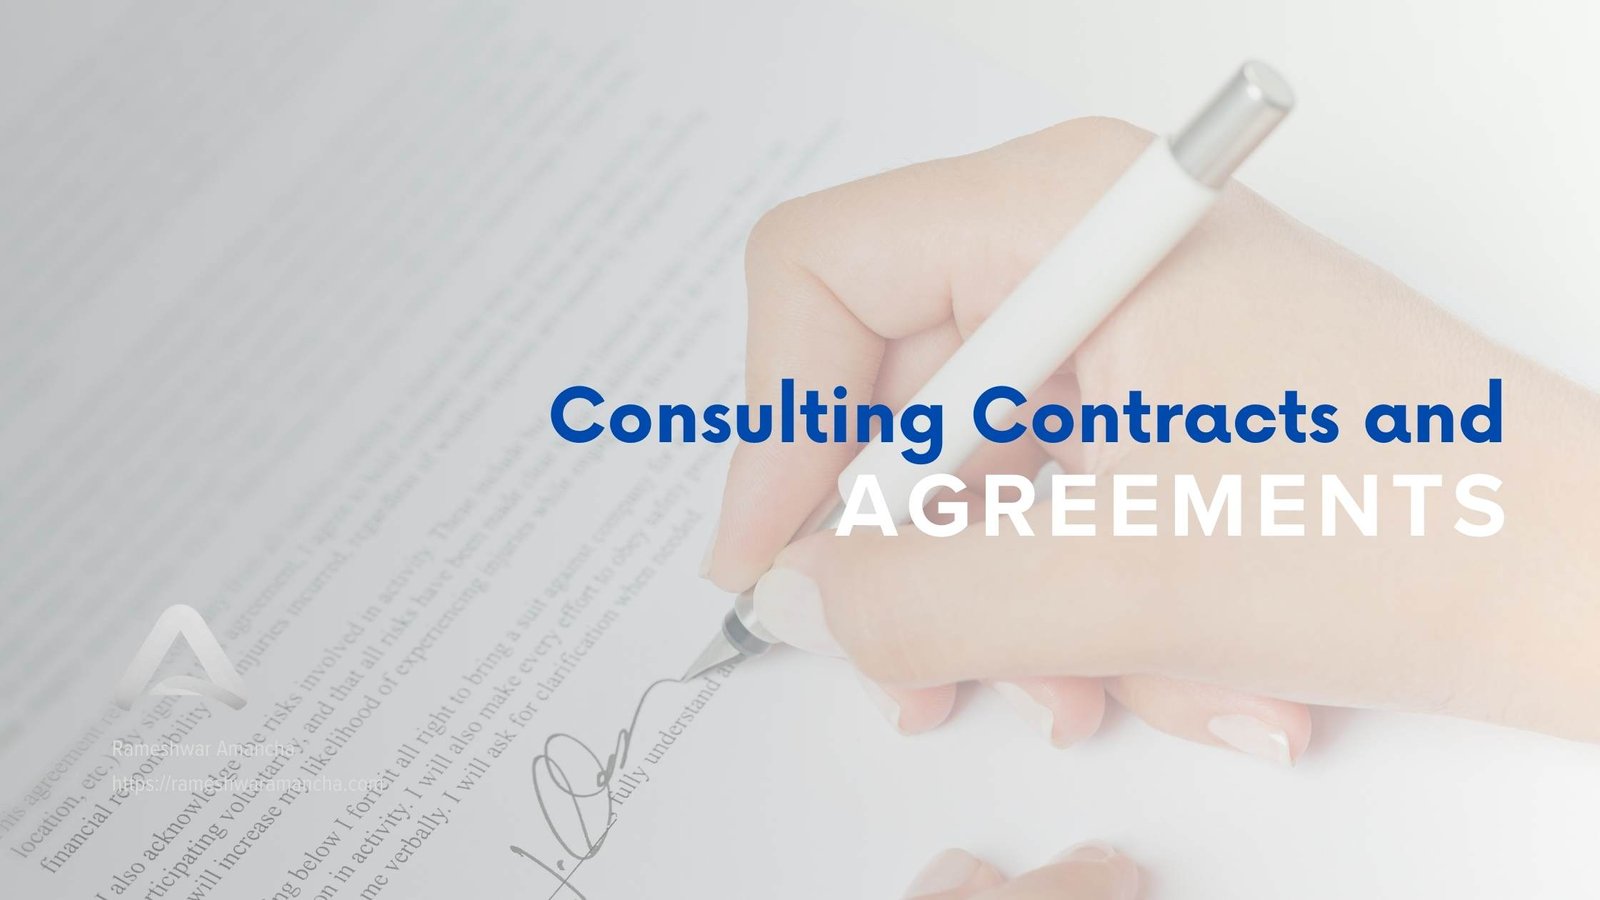 Consulting Contracts and Agreements